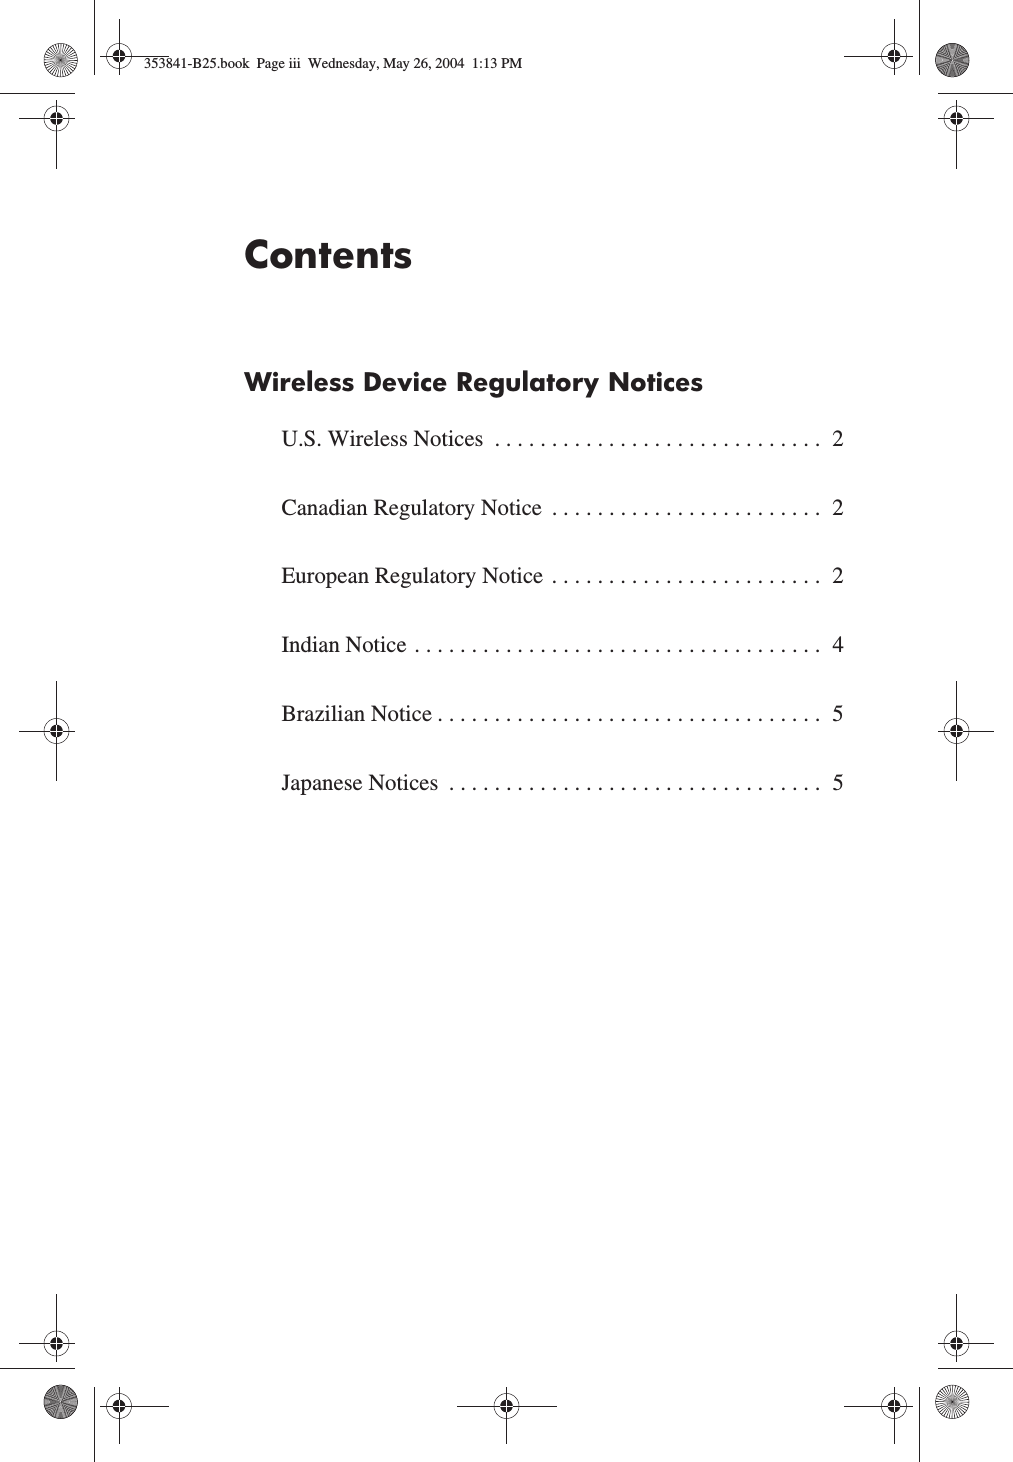 ContentsWireless Device Regulatory NoticesU.S. Wireless Notices  . . . . . . . . . . . . . . . . . . . . . . . . . . . . .  2Canadian Regulatory Notice  . . . . . . . . . . . . . . . . . . . . . . . .  2European Regulatory Notice . . . . . . . . . . . . . . . . . . . . . . . .  2Indian Notice . . . . . . . . . . . . . . . . . . . . . . . . . . . . . . . . . . . .  4Brazilian Notice . . . . . . . . . . . . . . . . . . . . . . . . . . . . . . . . . .  5Japanese Notices  . . . . . . . . . . . . . . . . . . . . . . . . . . . . . . . . .  5353841-B25.book  Page iii  Wednesday, May 26, 2004  1:13 PM